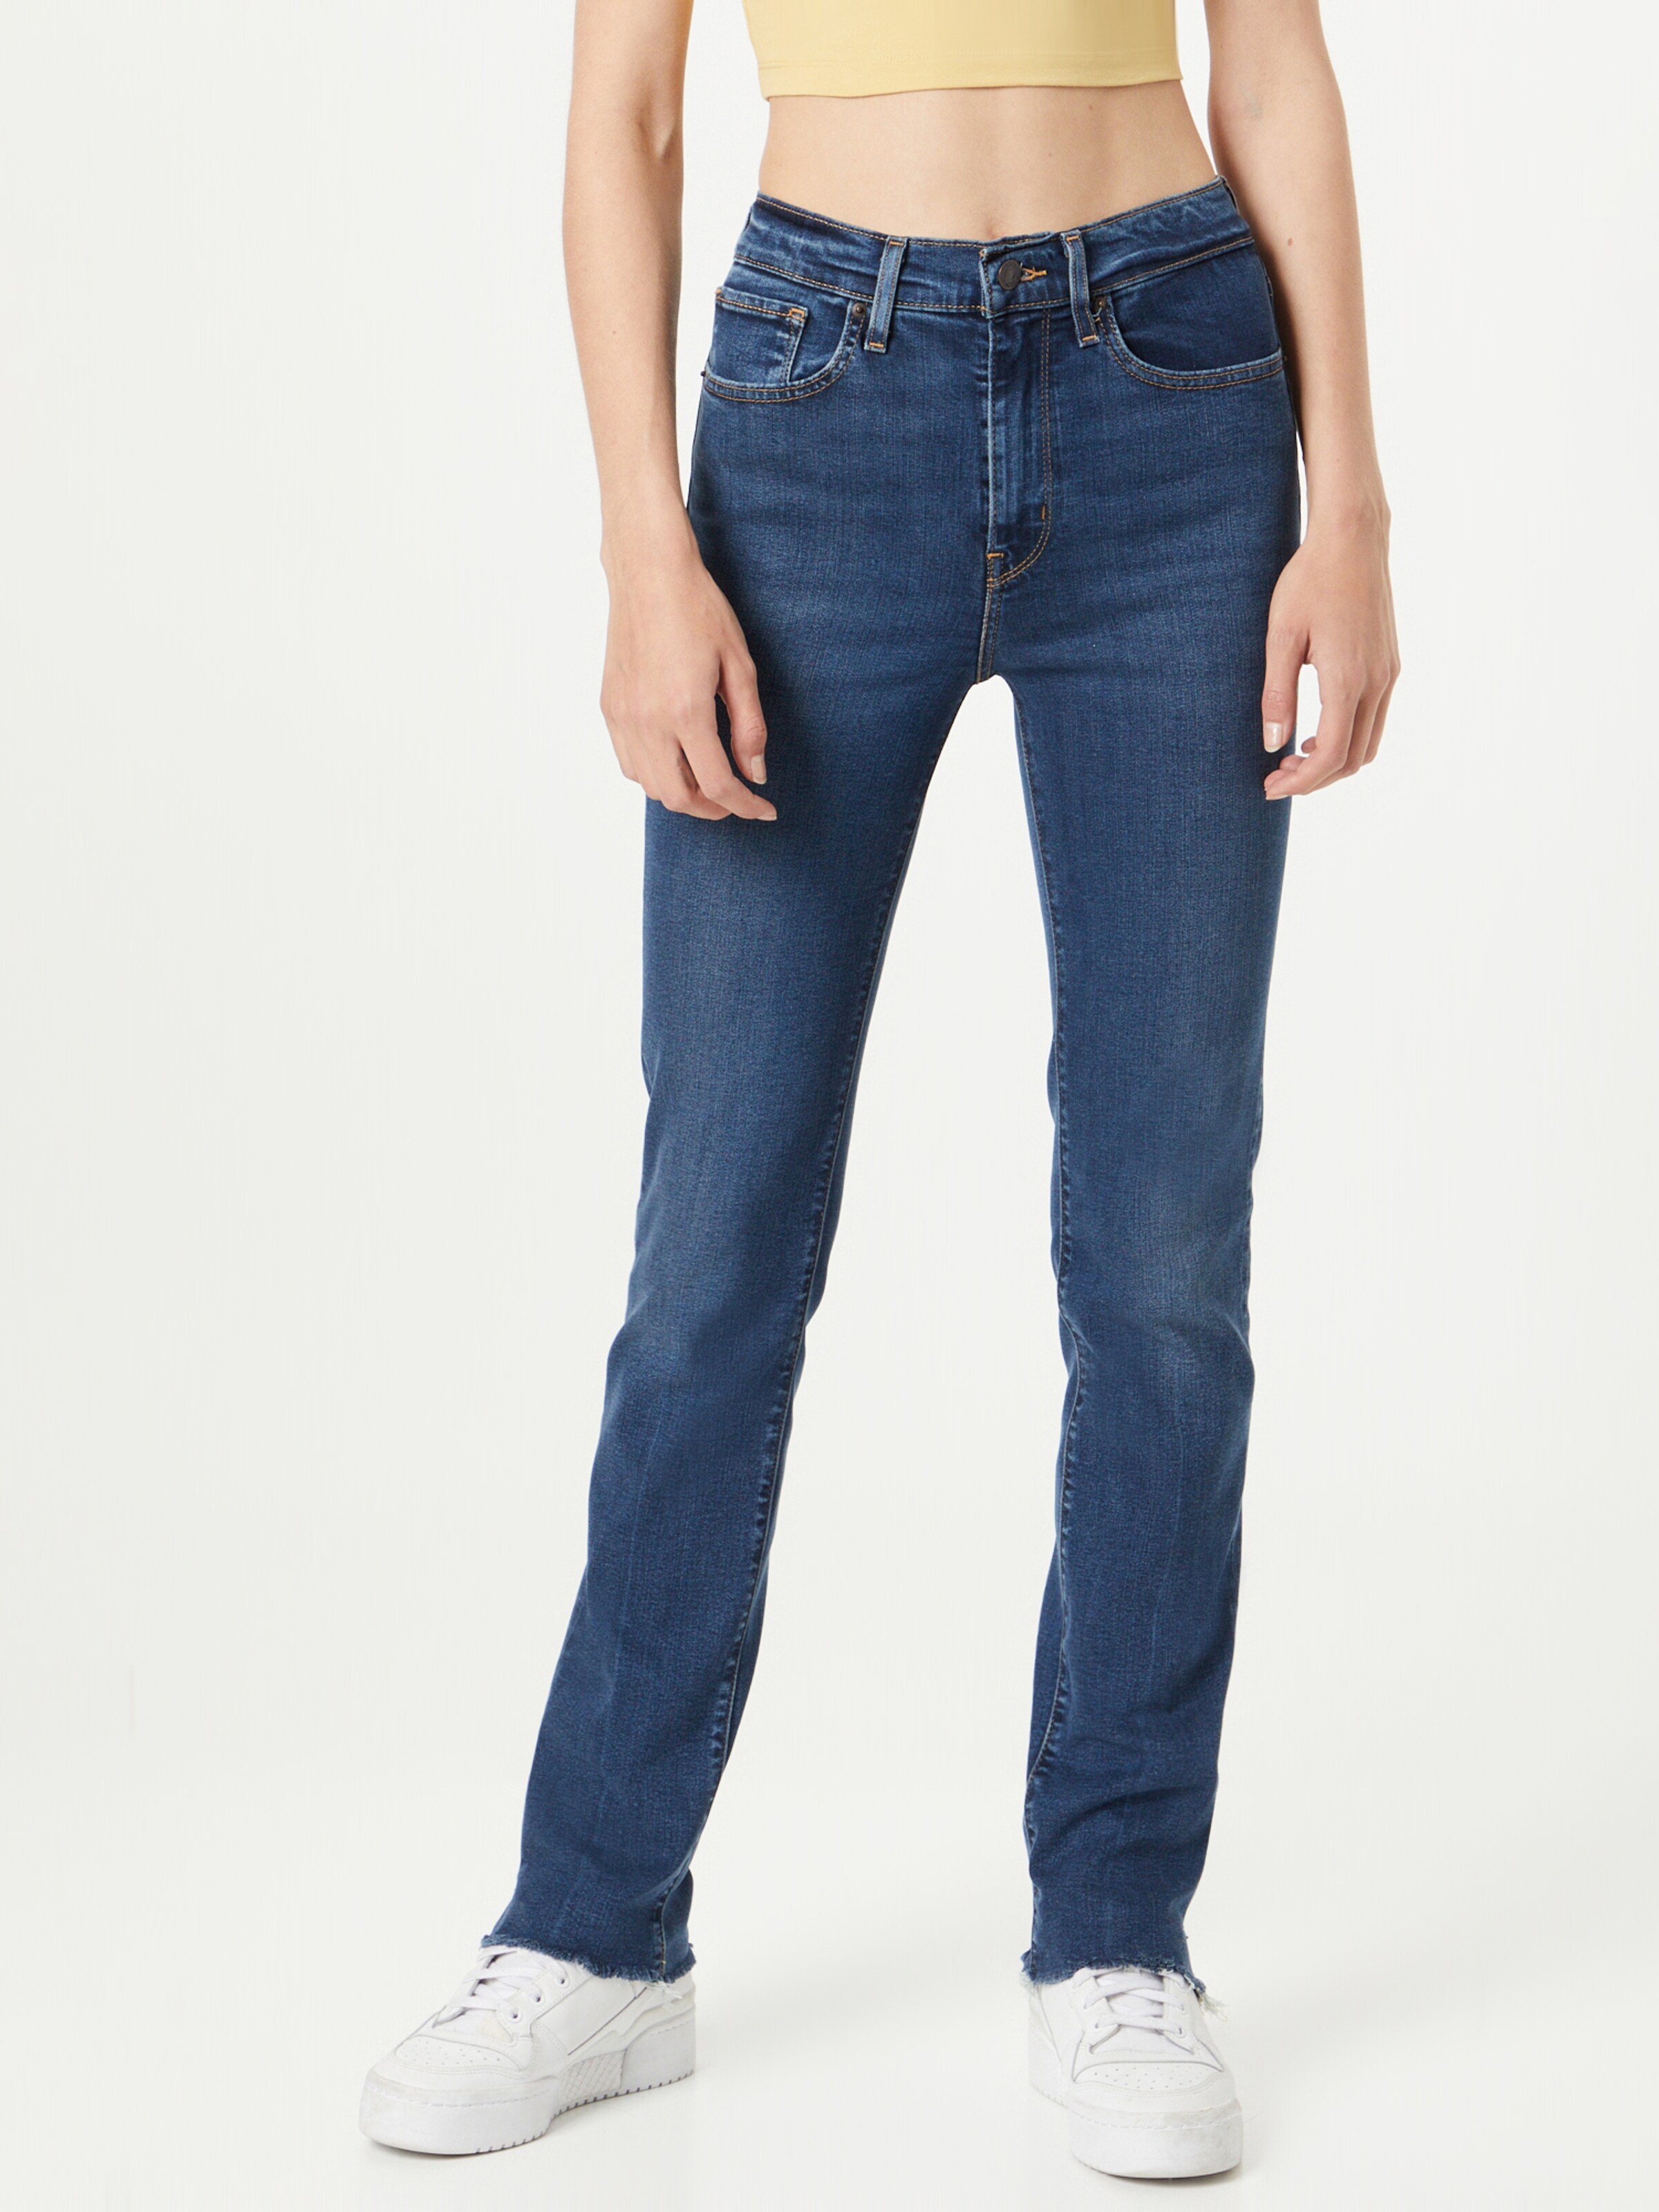 Moda grandes LEVI'S para mujer » online en ABOUT YOU